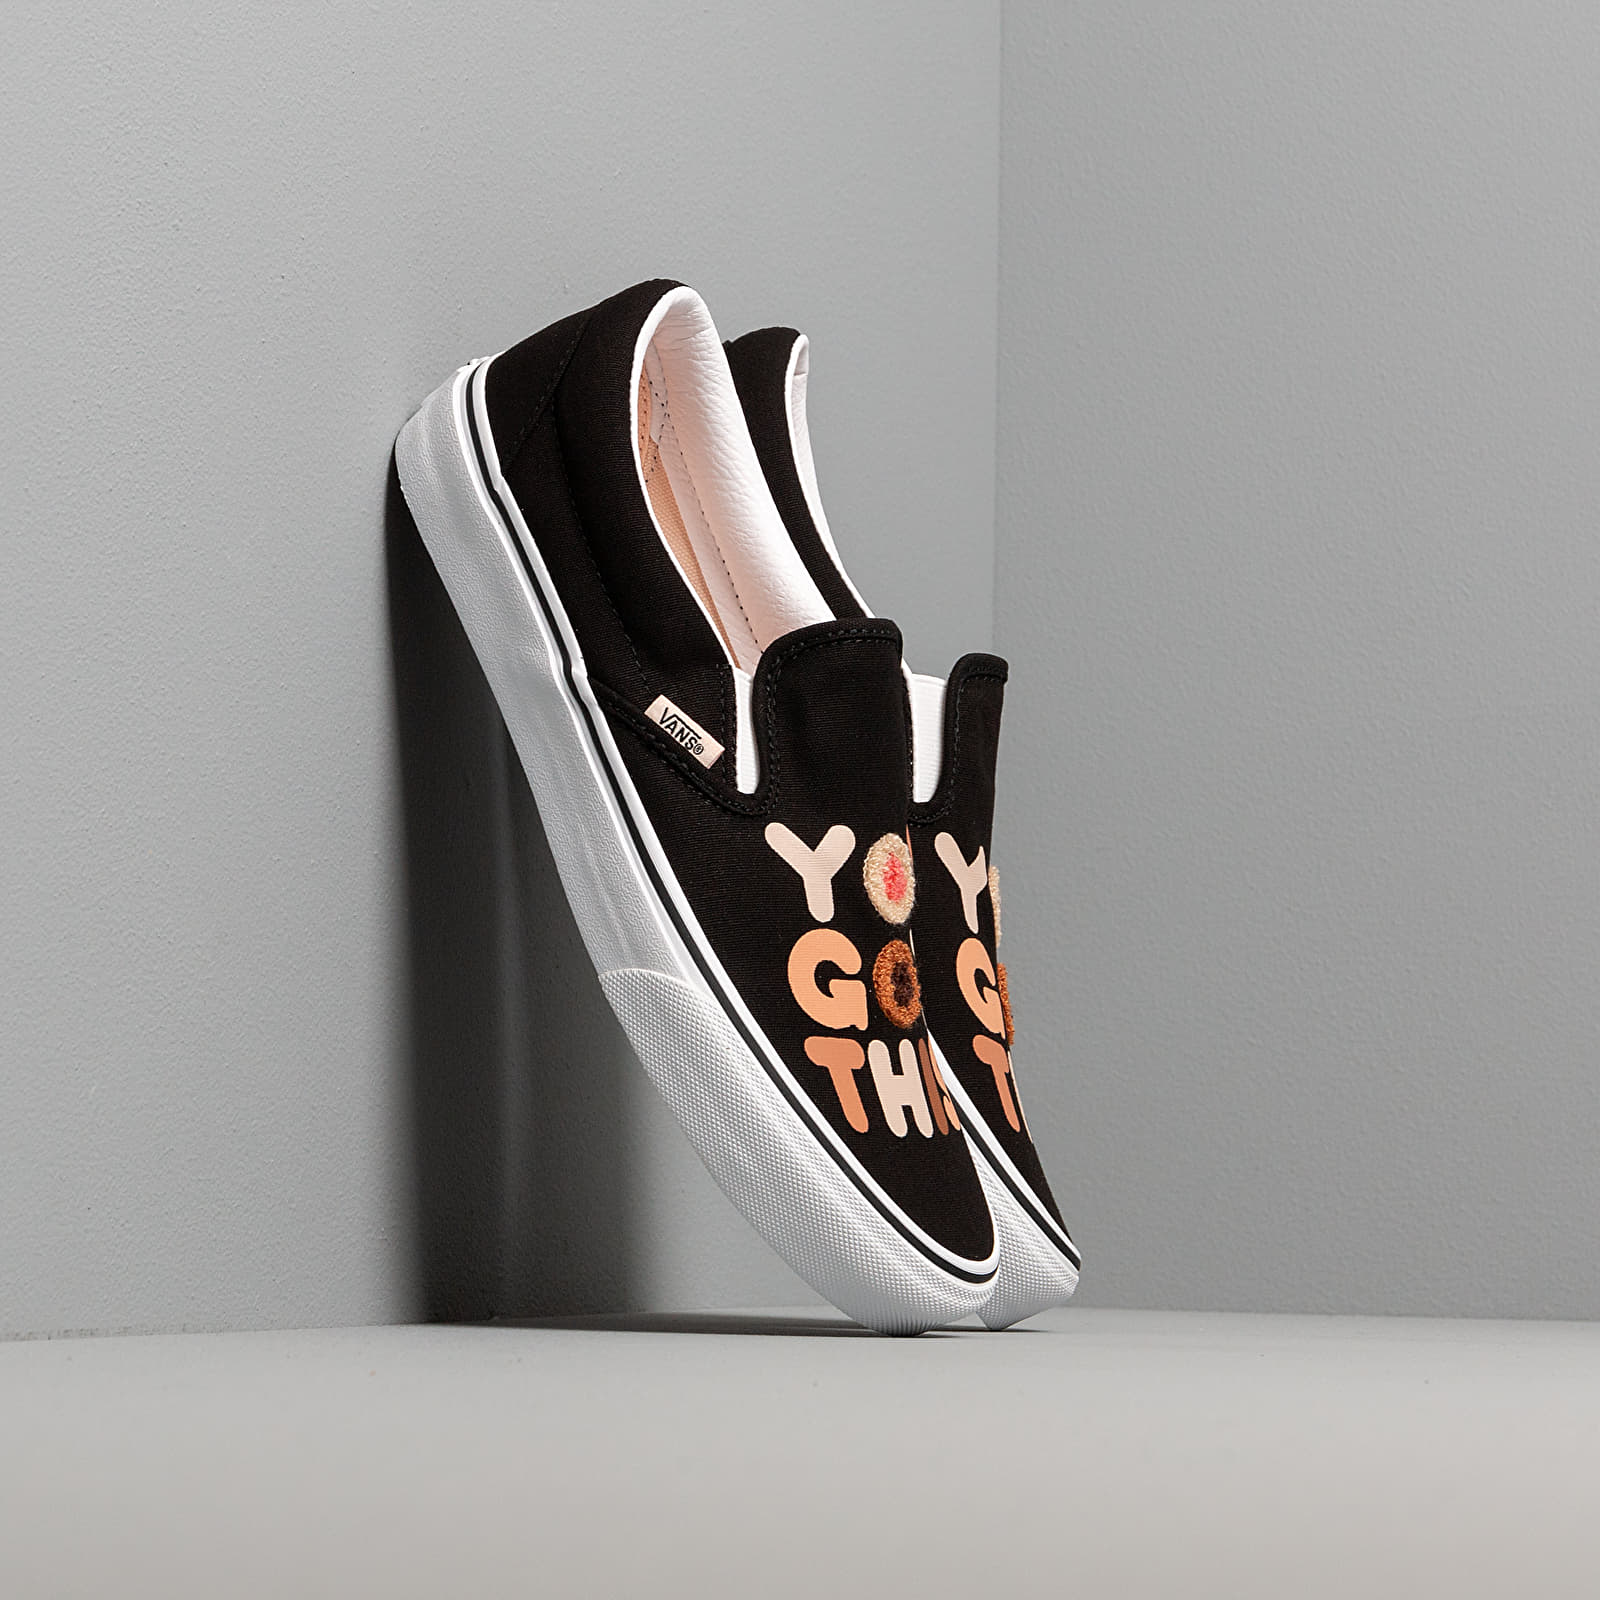 Pánske tenisky a topánky Vans Breast Cancer Awareness Classic Slip-On You Got This/ True White